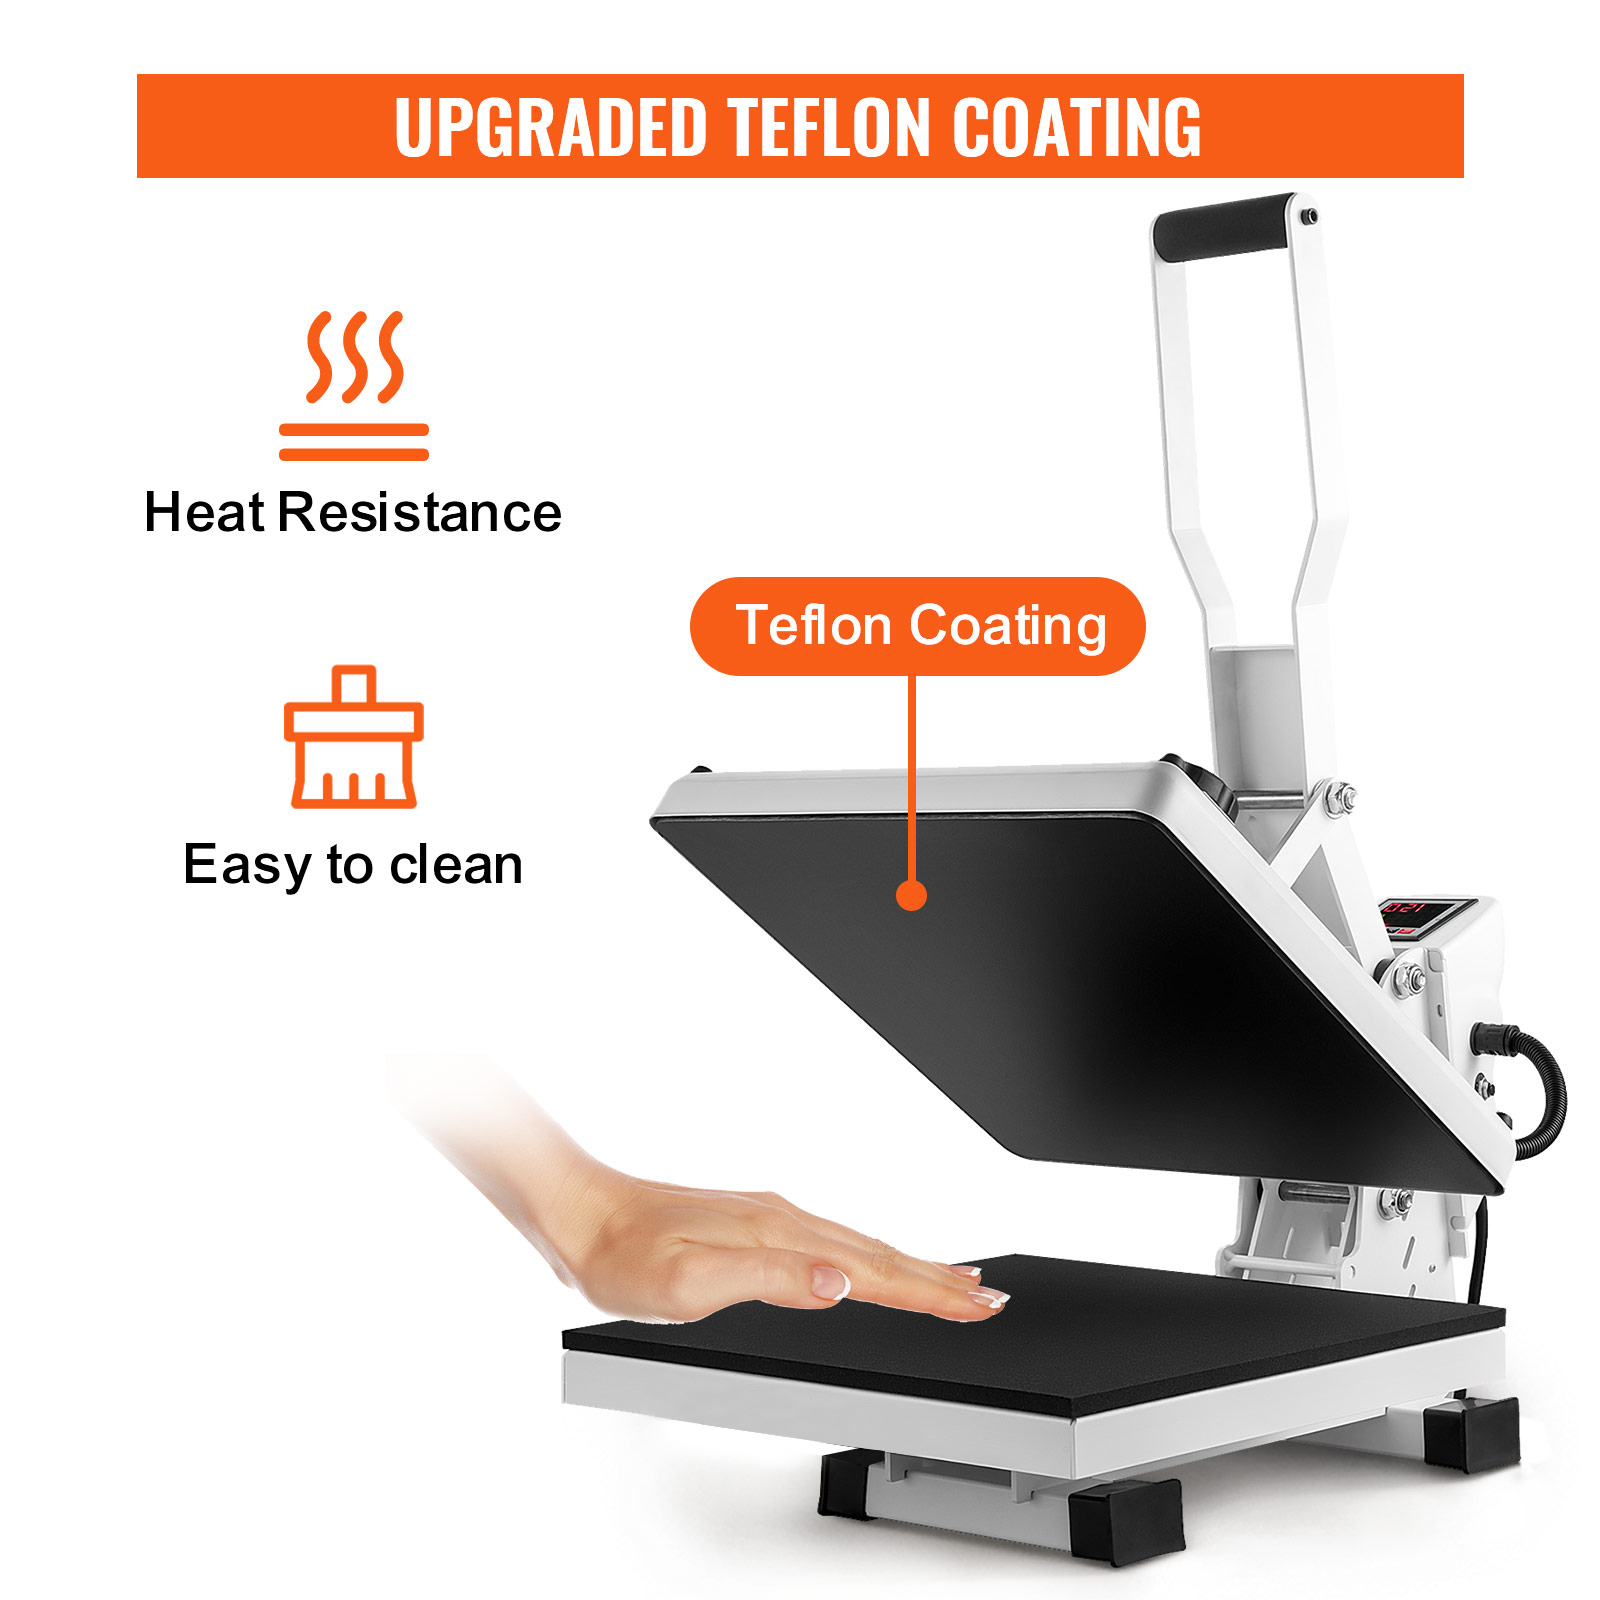 VEVOR 4-in-1 Heat Press Machine for Hats with 6x3inches Curved Teflon-Coated Heat Plate, Easy Temperature Control Non-Slip Base, Four Replaceable